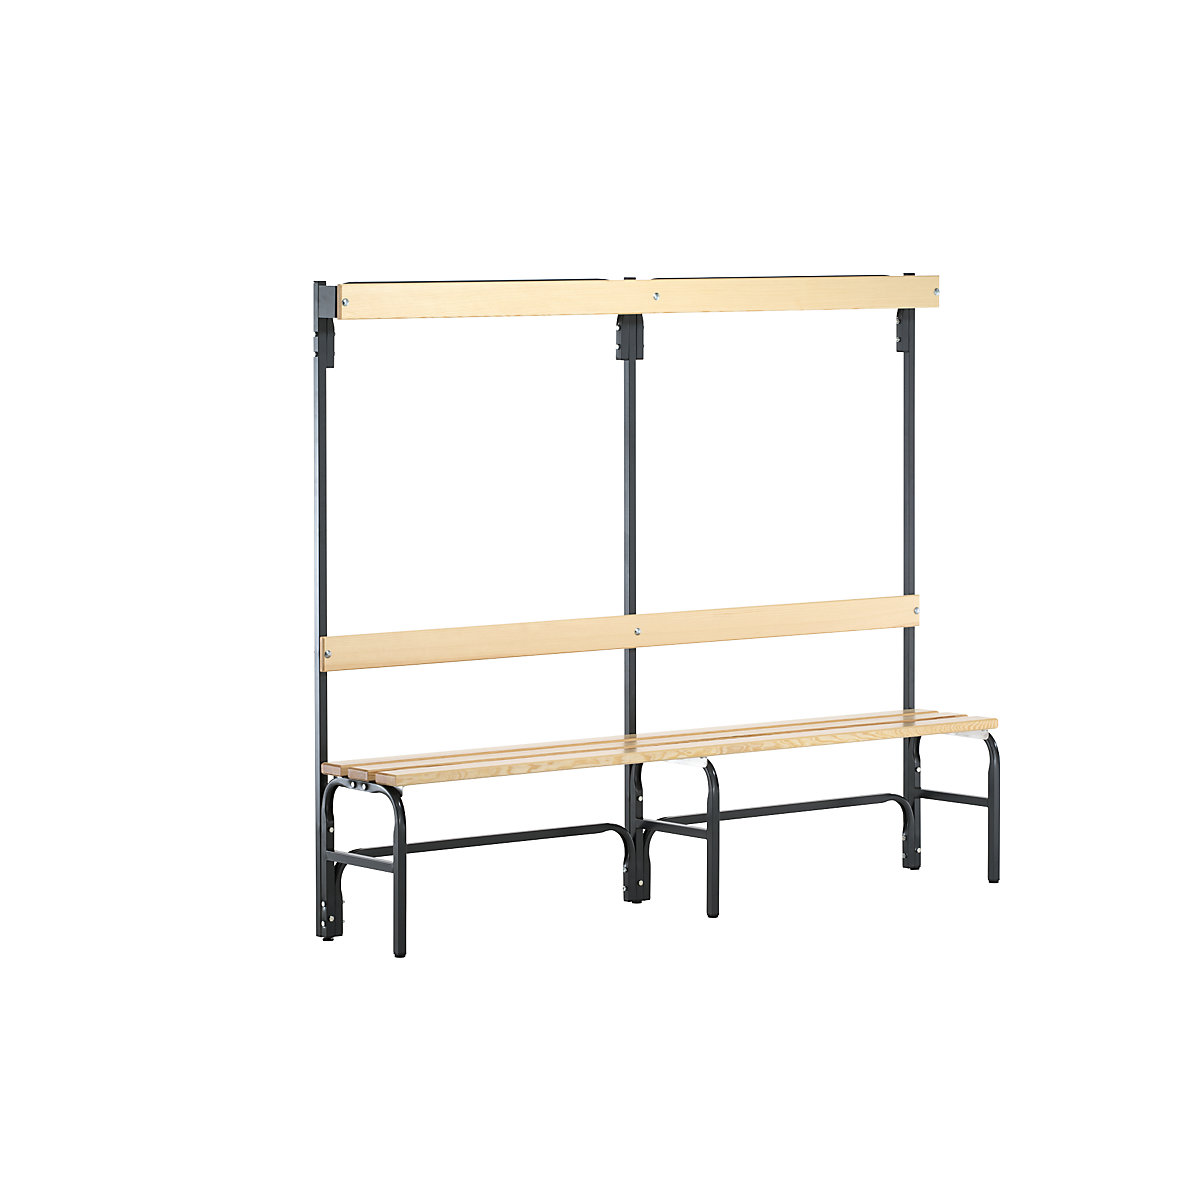 Sypro – Cloakroom bench with hook strips